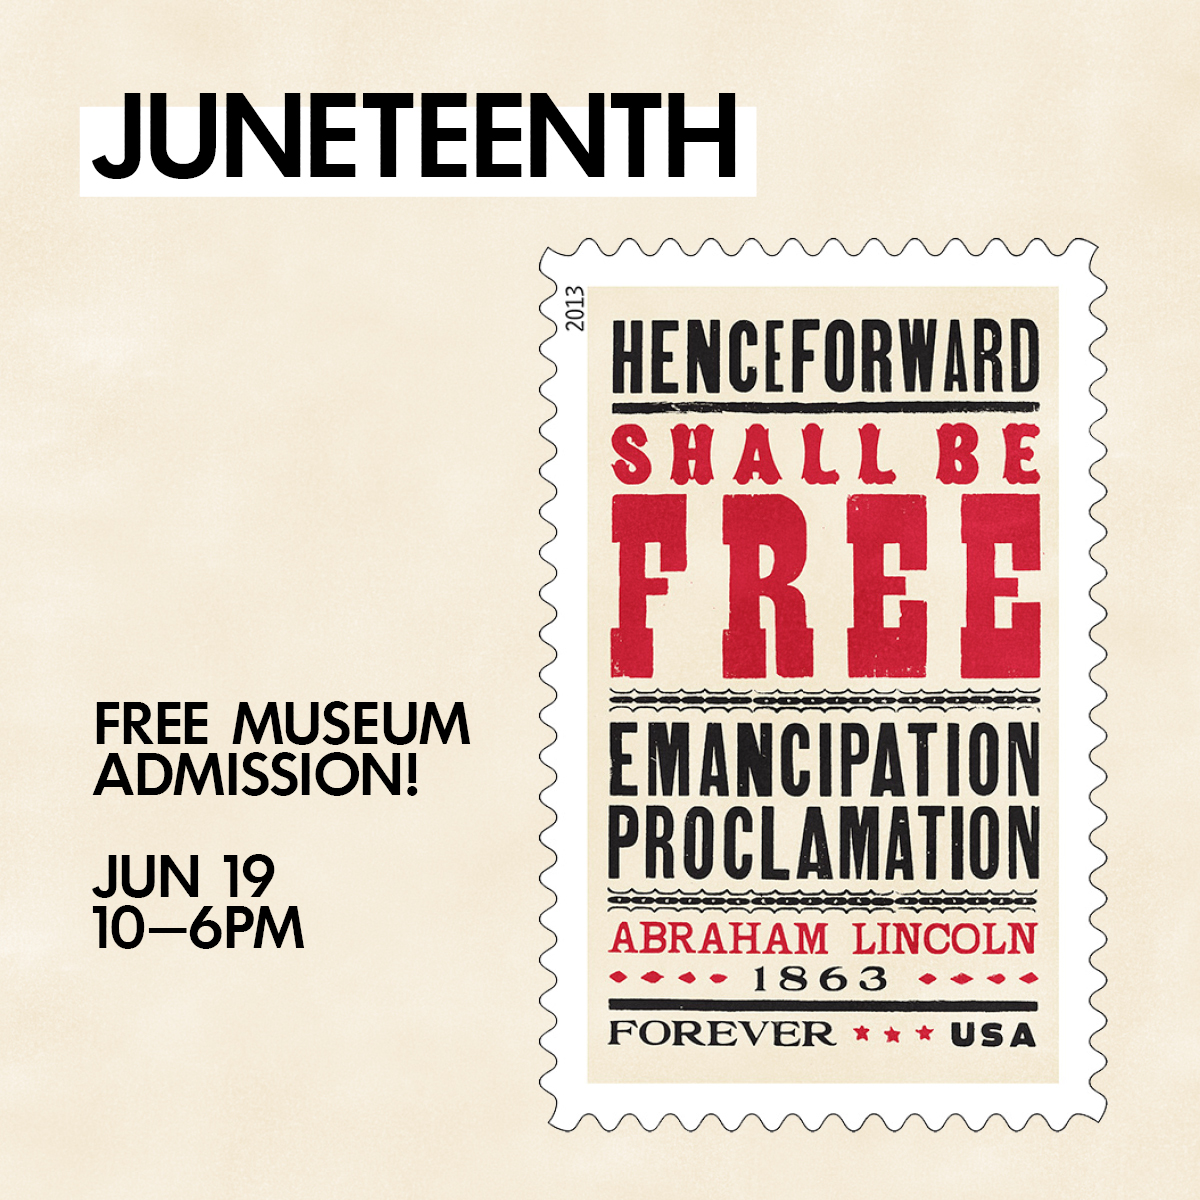 Announcement promoting Juneteenth featuring a graphic of a postage stamp on a cream background. Text reads Juneteenth free museum admission! June 19 10 to 6pm 2013 Henceforward Shall Be Free Emancipation Proclamation Abraham Lincoln 1863 Forever USA.